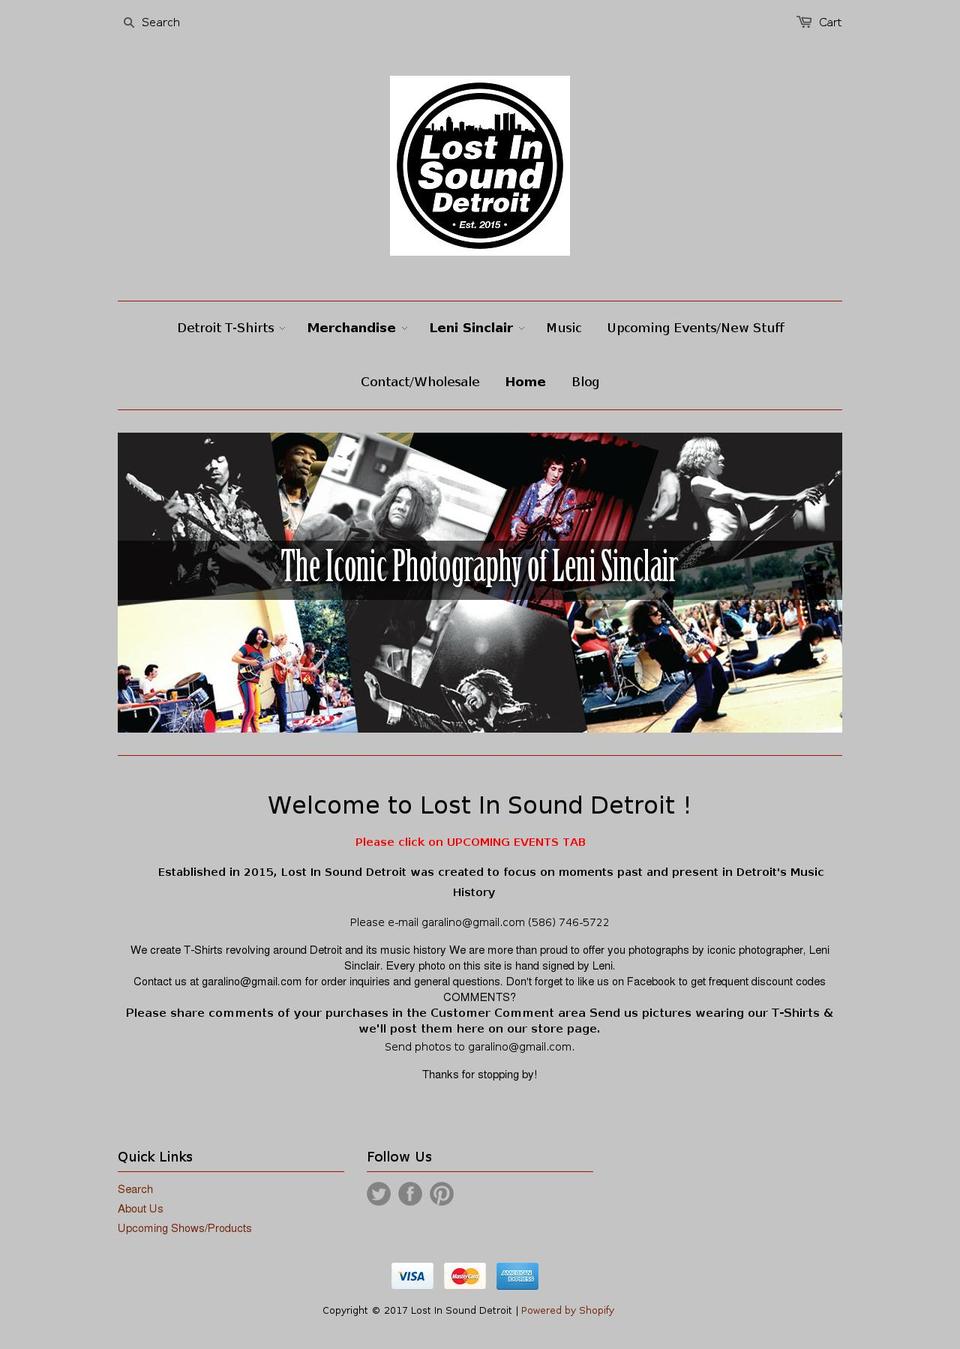 Ride Shopify theme site example lostinsounddetroit.com